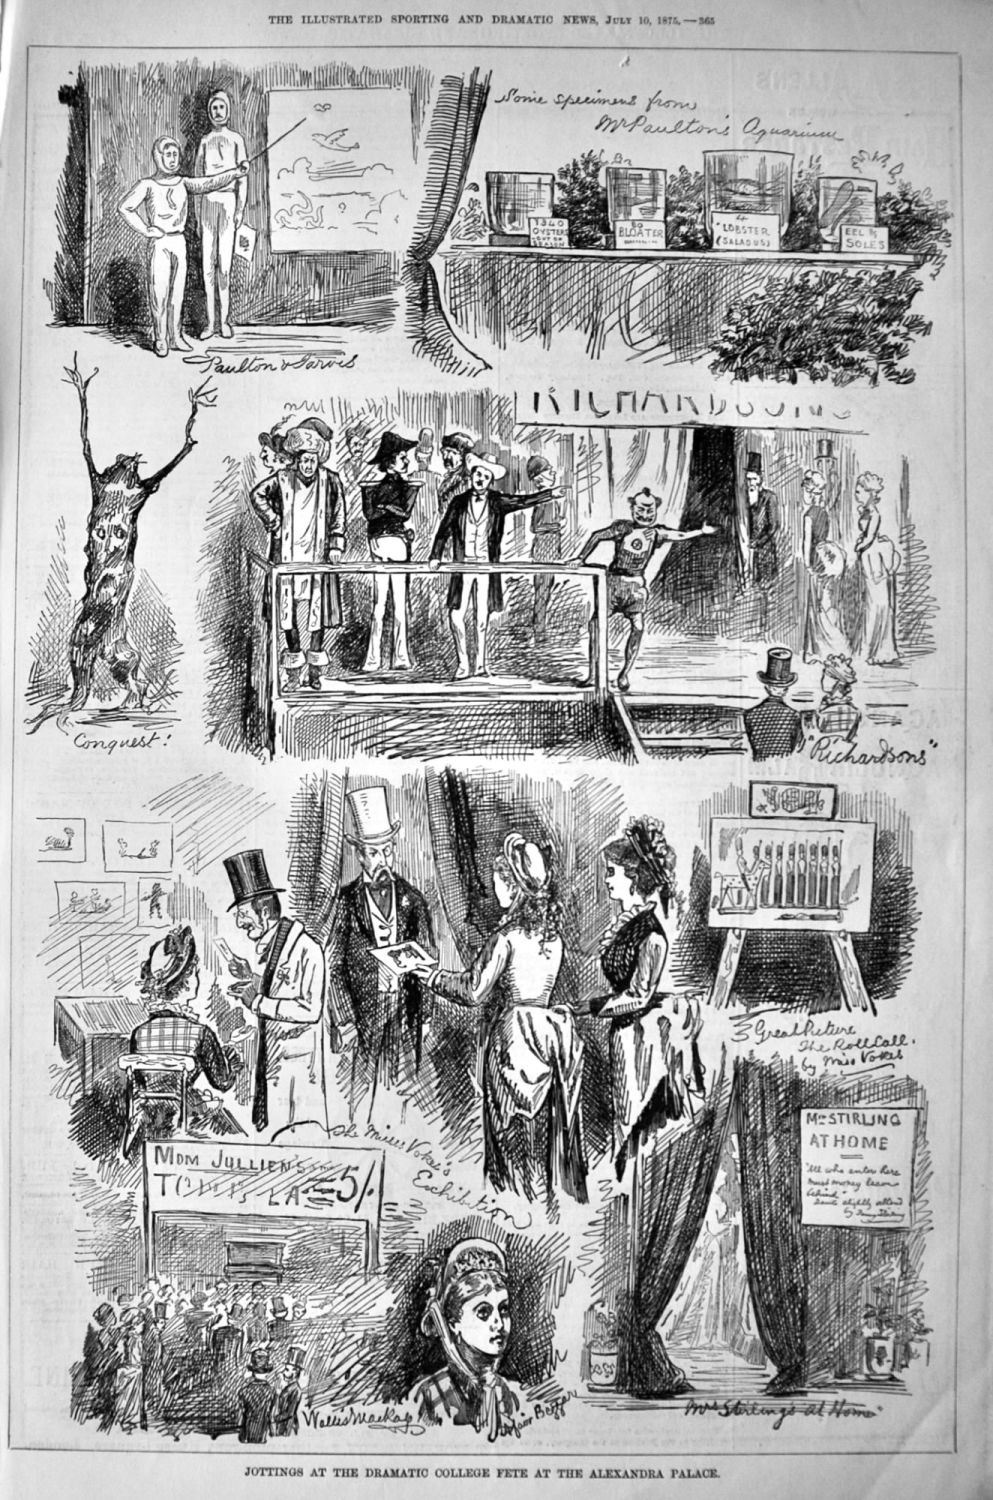 Jottings at the Dramatic College Fete at the Alexandra Palace.  1875.